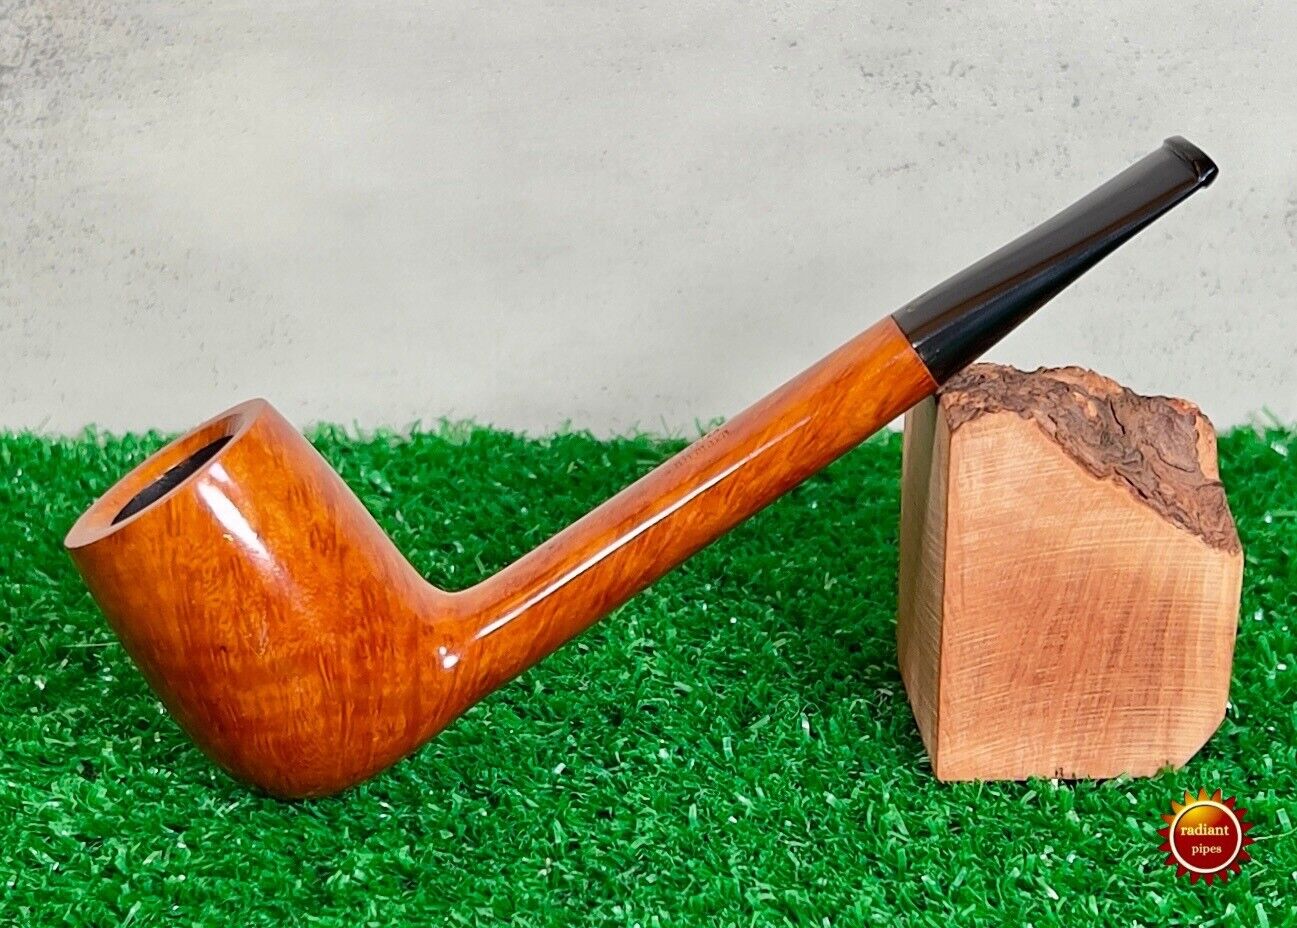 NOS Charles Fairmorn Pipe, Canadian In Mint Condition, Freshly Waxed Unsmoked.